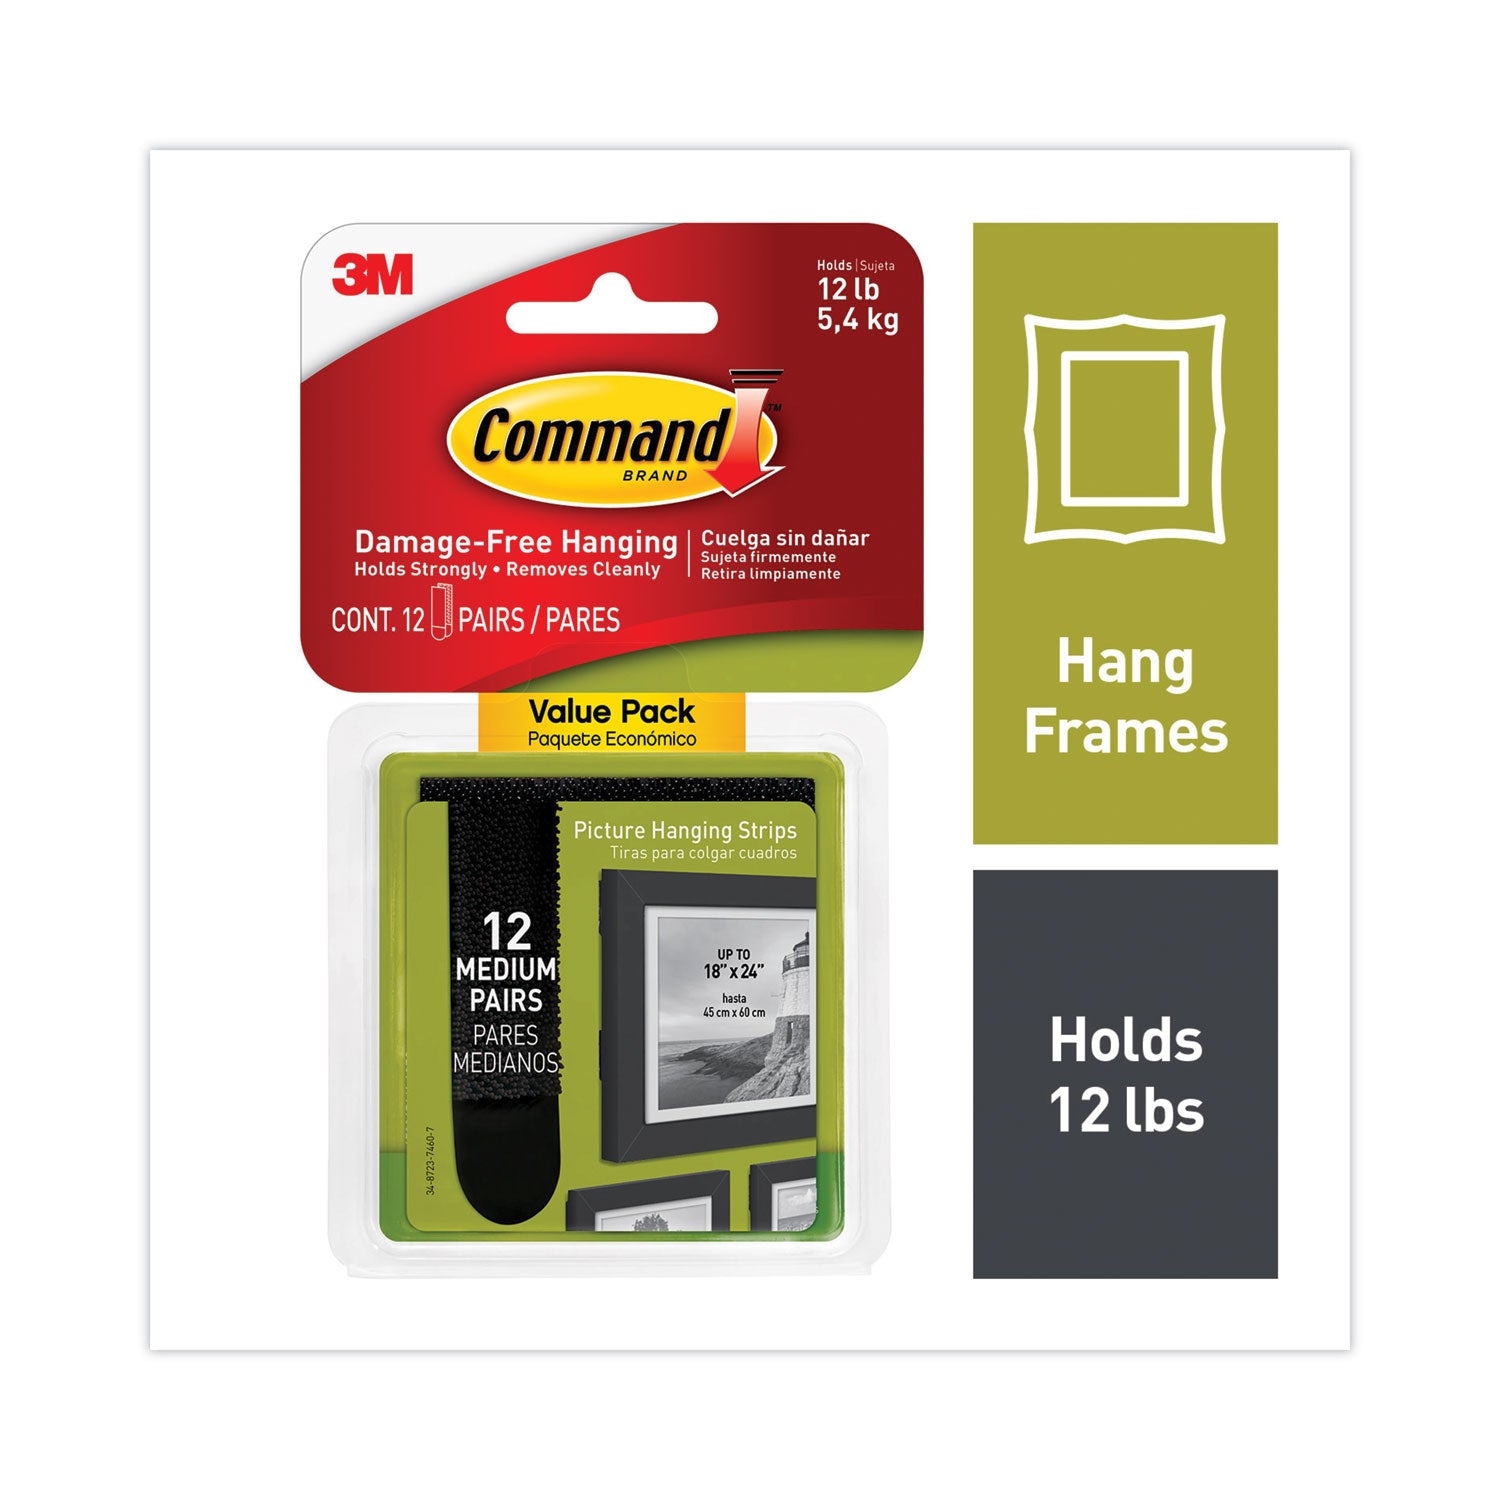 picture-hanging-strips-value-pack-medium-removable-holds-up-to-12-lbs-075-x-275-black-12-pairs-pack_mmm17204blk12es - 2